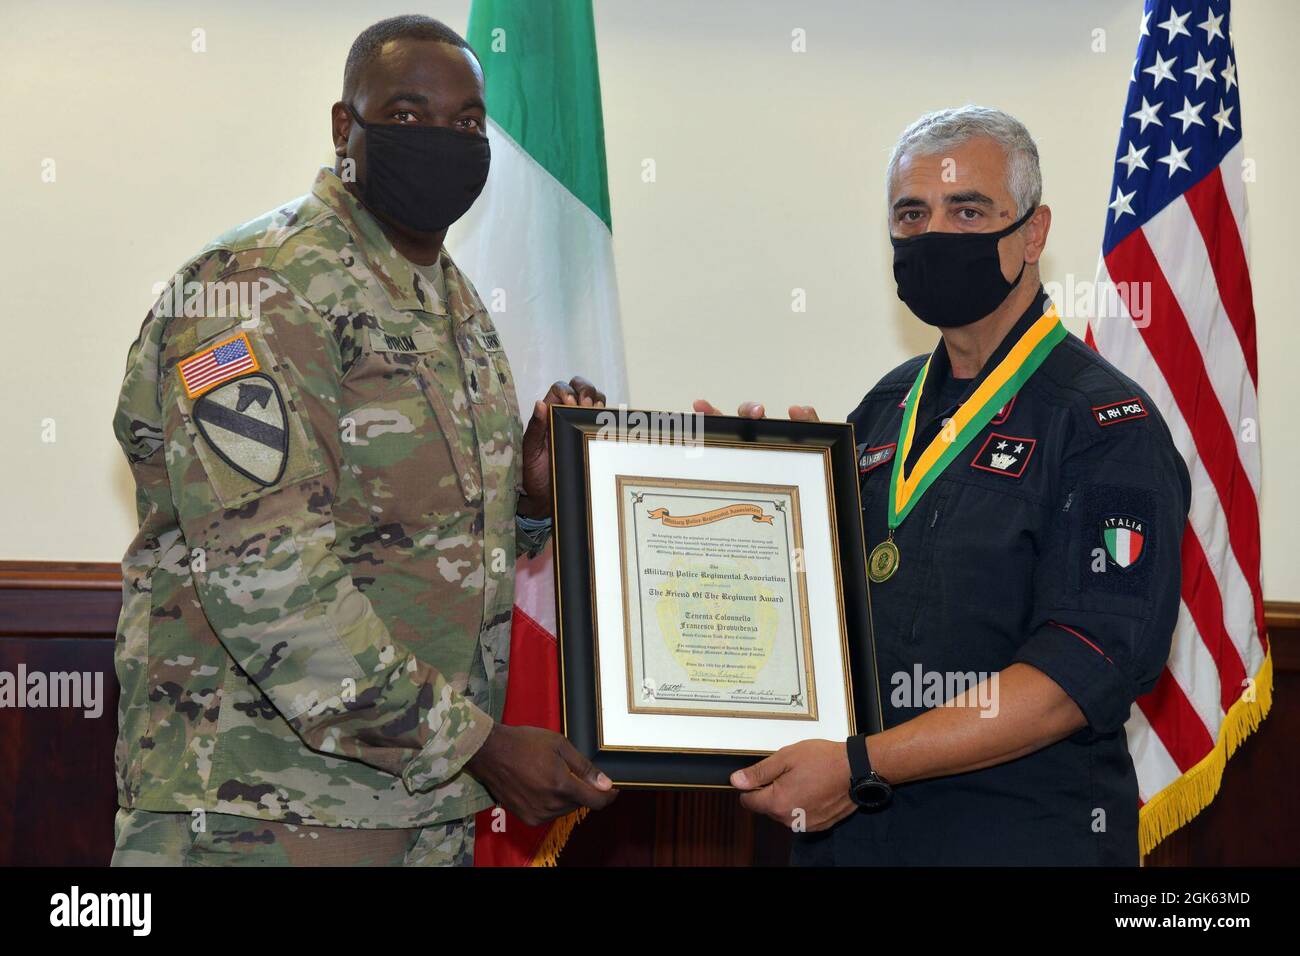 Lt. Col. Francesco Provvidenza, right, Company Commander of the Italian Army Carabinieri South European Task Force receives of the Military Police Regiment Association for the Friend of the Regiment Award from U.S. Army Lt. Col. Vaughan M. Byrum, left, Director of Emergency Services U.S. Army Garrison Italy, under Covid-19 prevention condition at Caserma Ederle, Vicenza, Italy August 12, 2021. Stock Photo